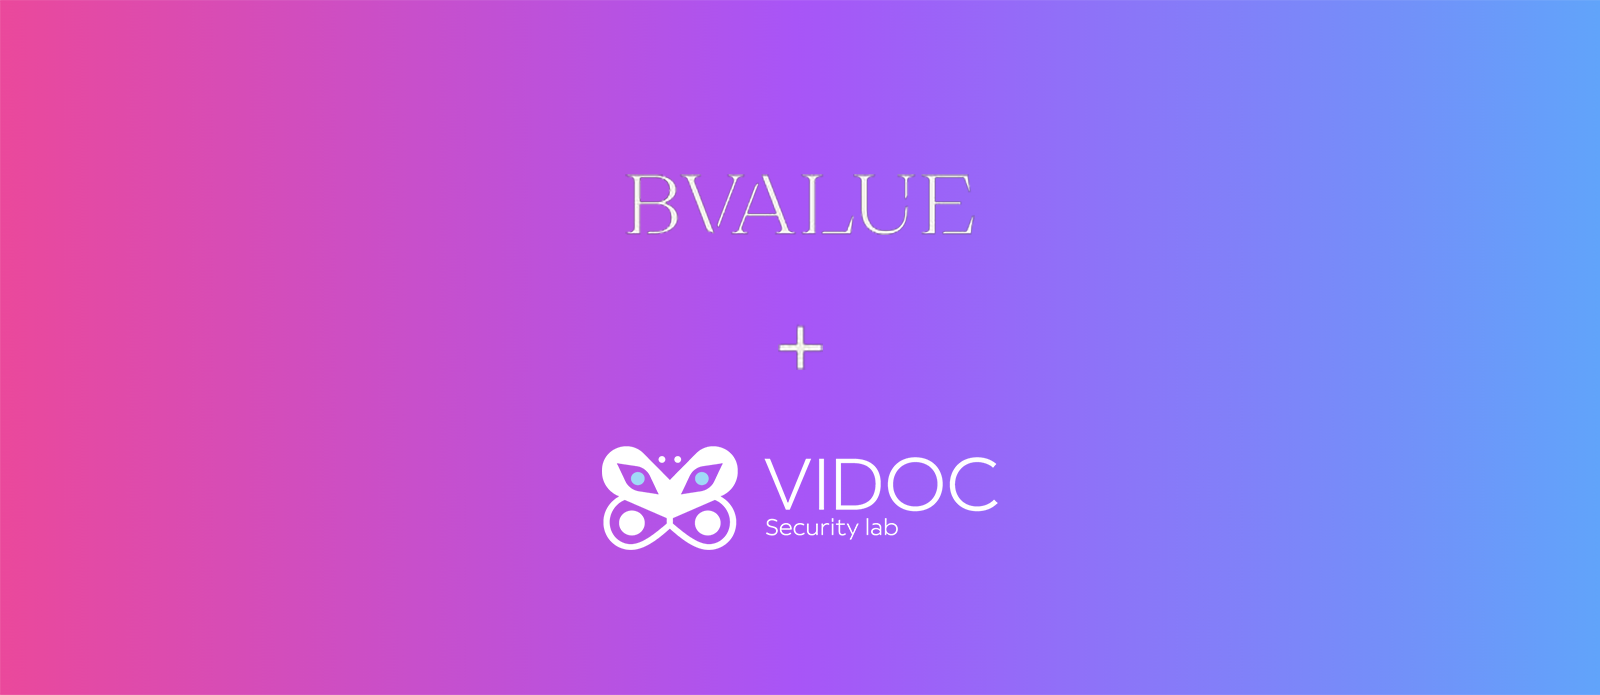 Vidoc Secures Funding from bValue!